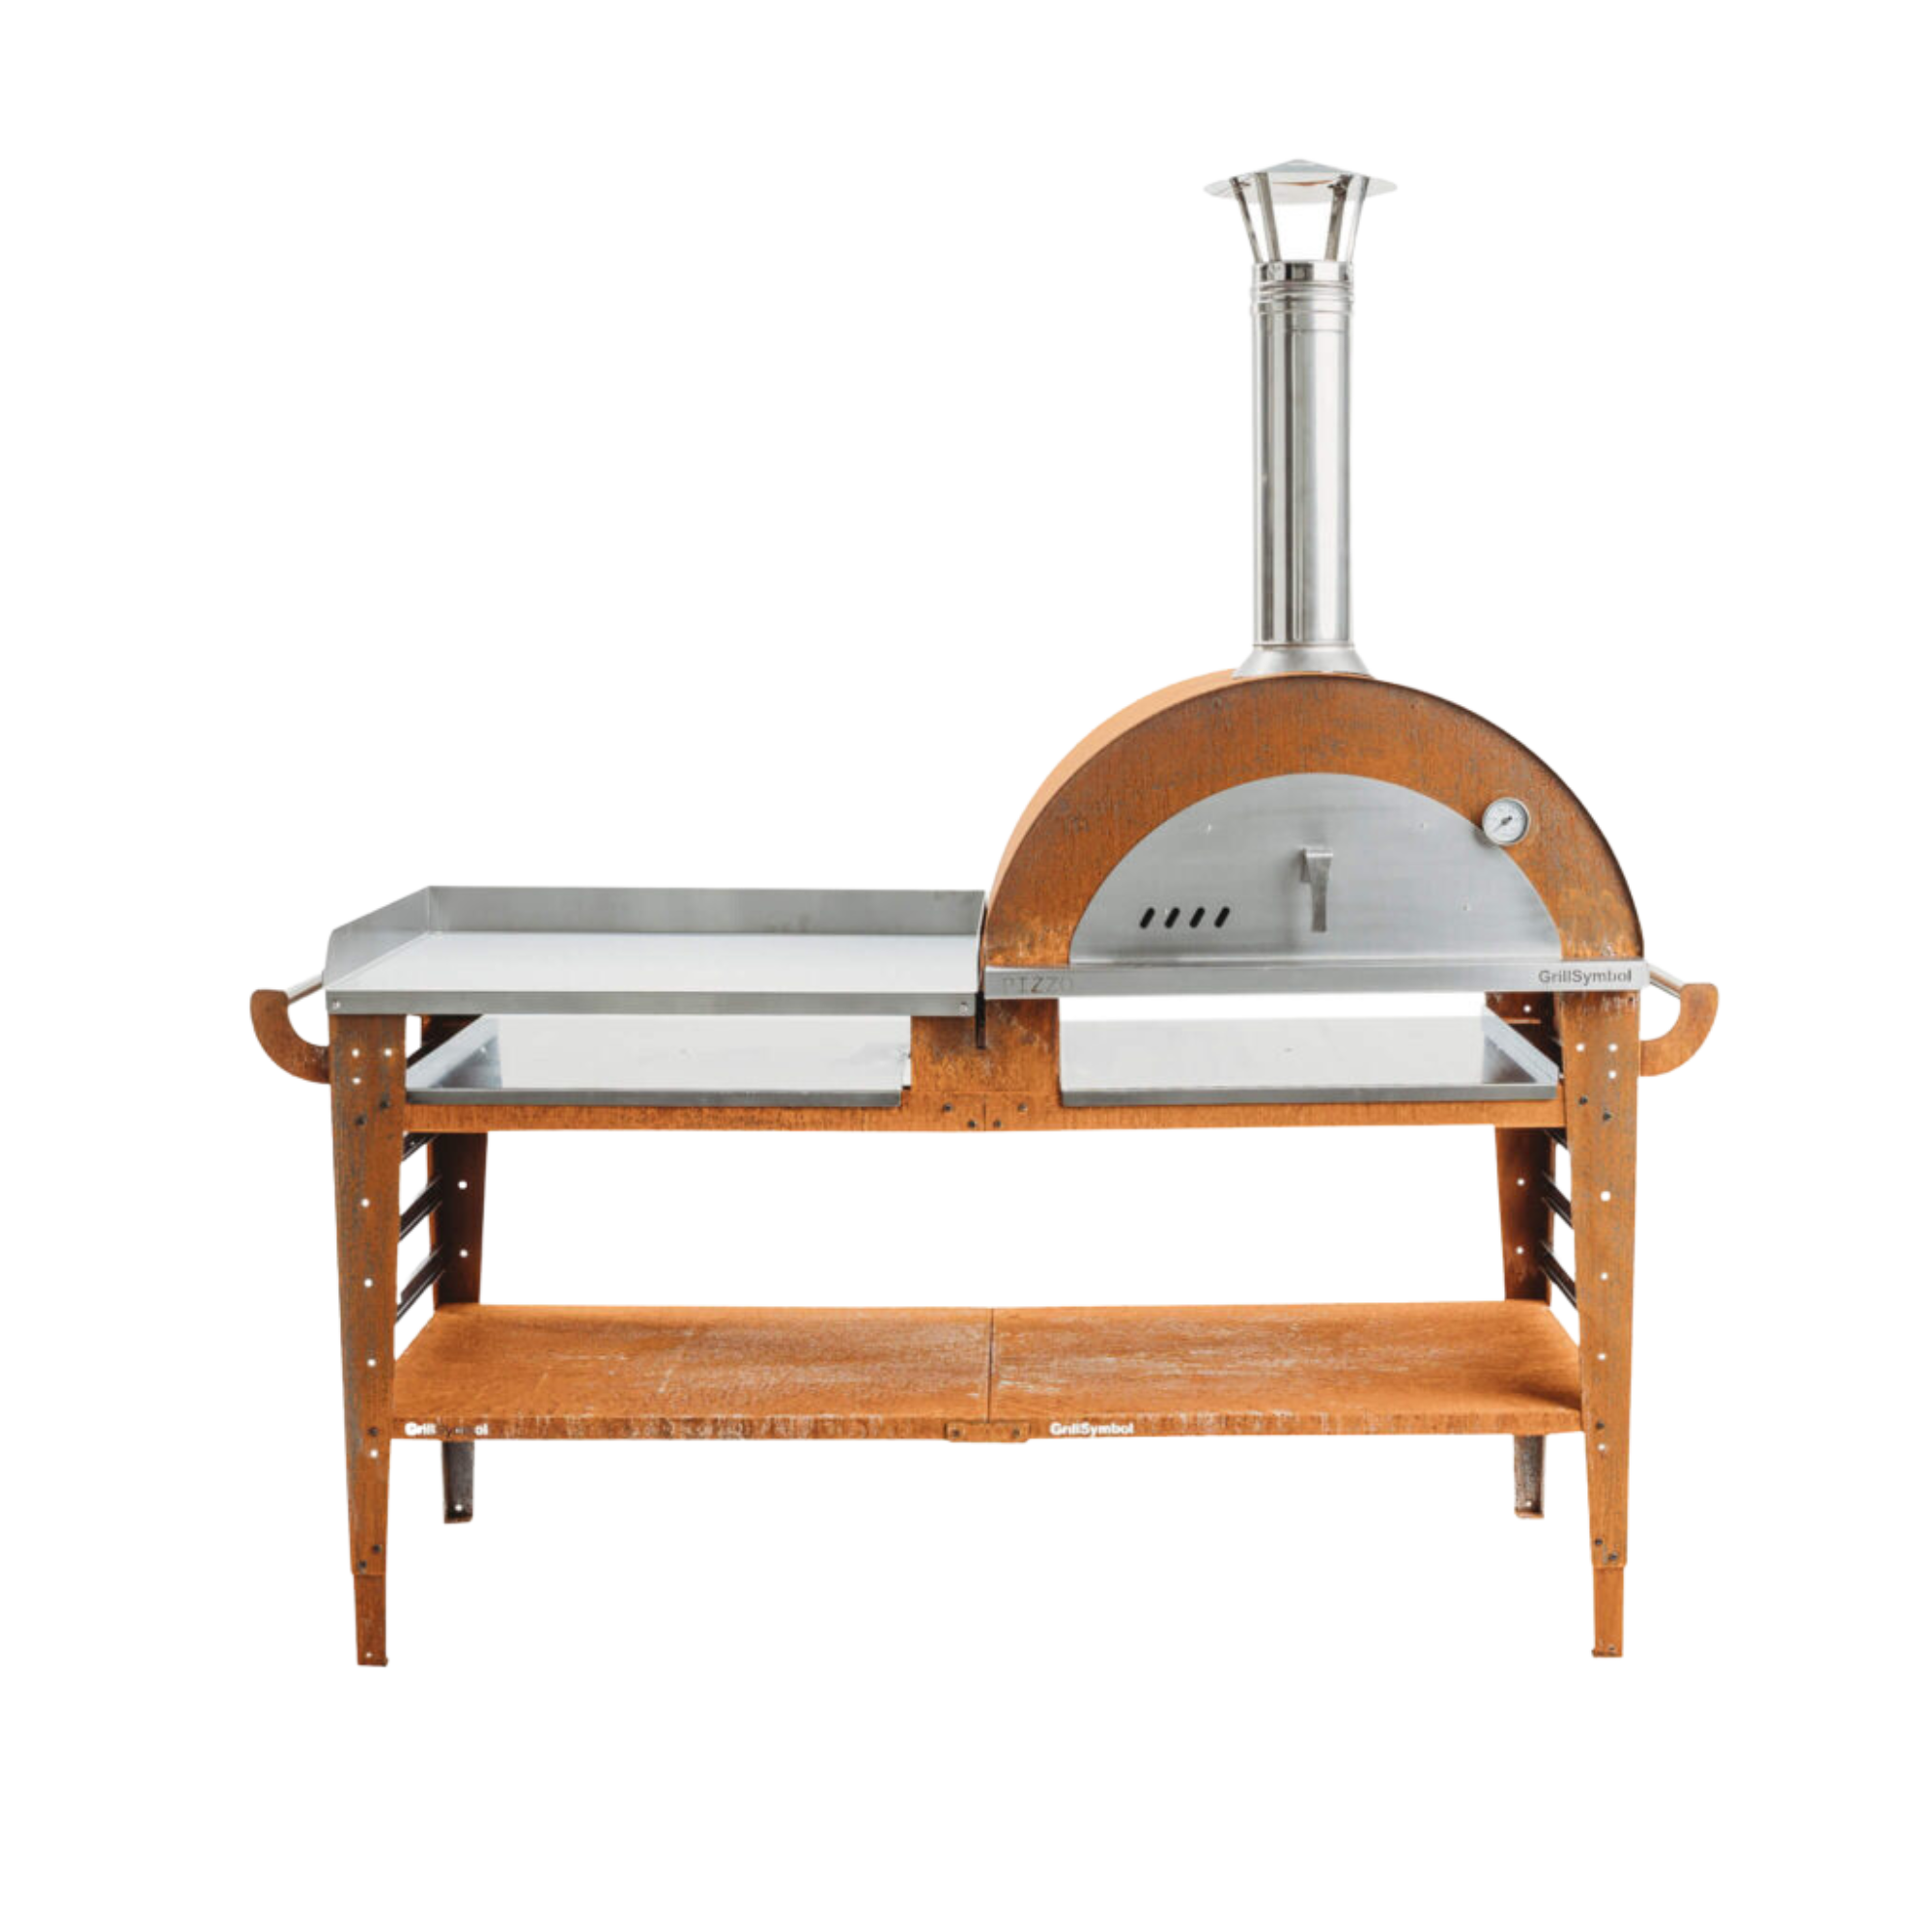 Pizzo-XL-Set Wood Fired Pizza Oven with Stand & Side Table